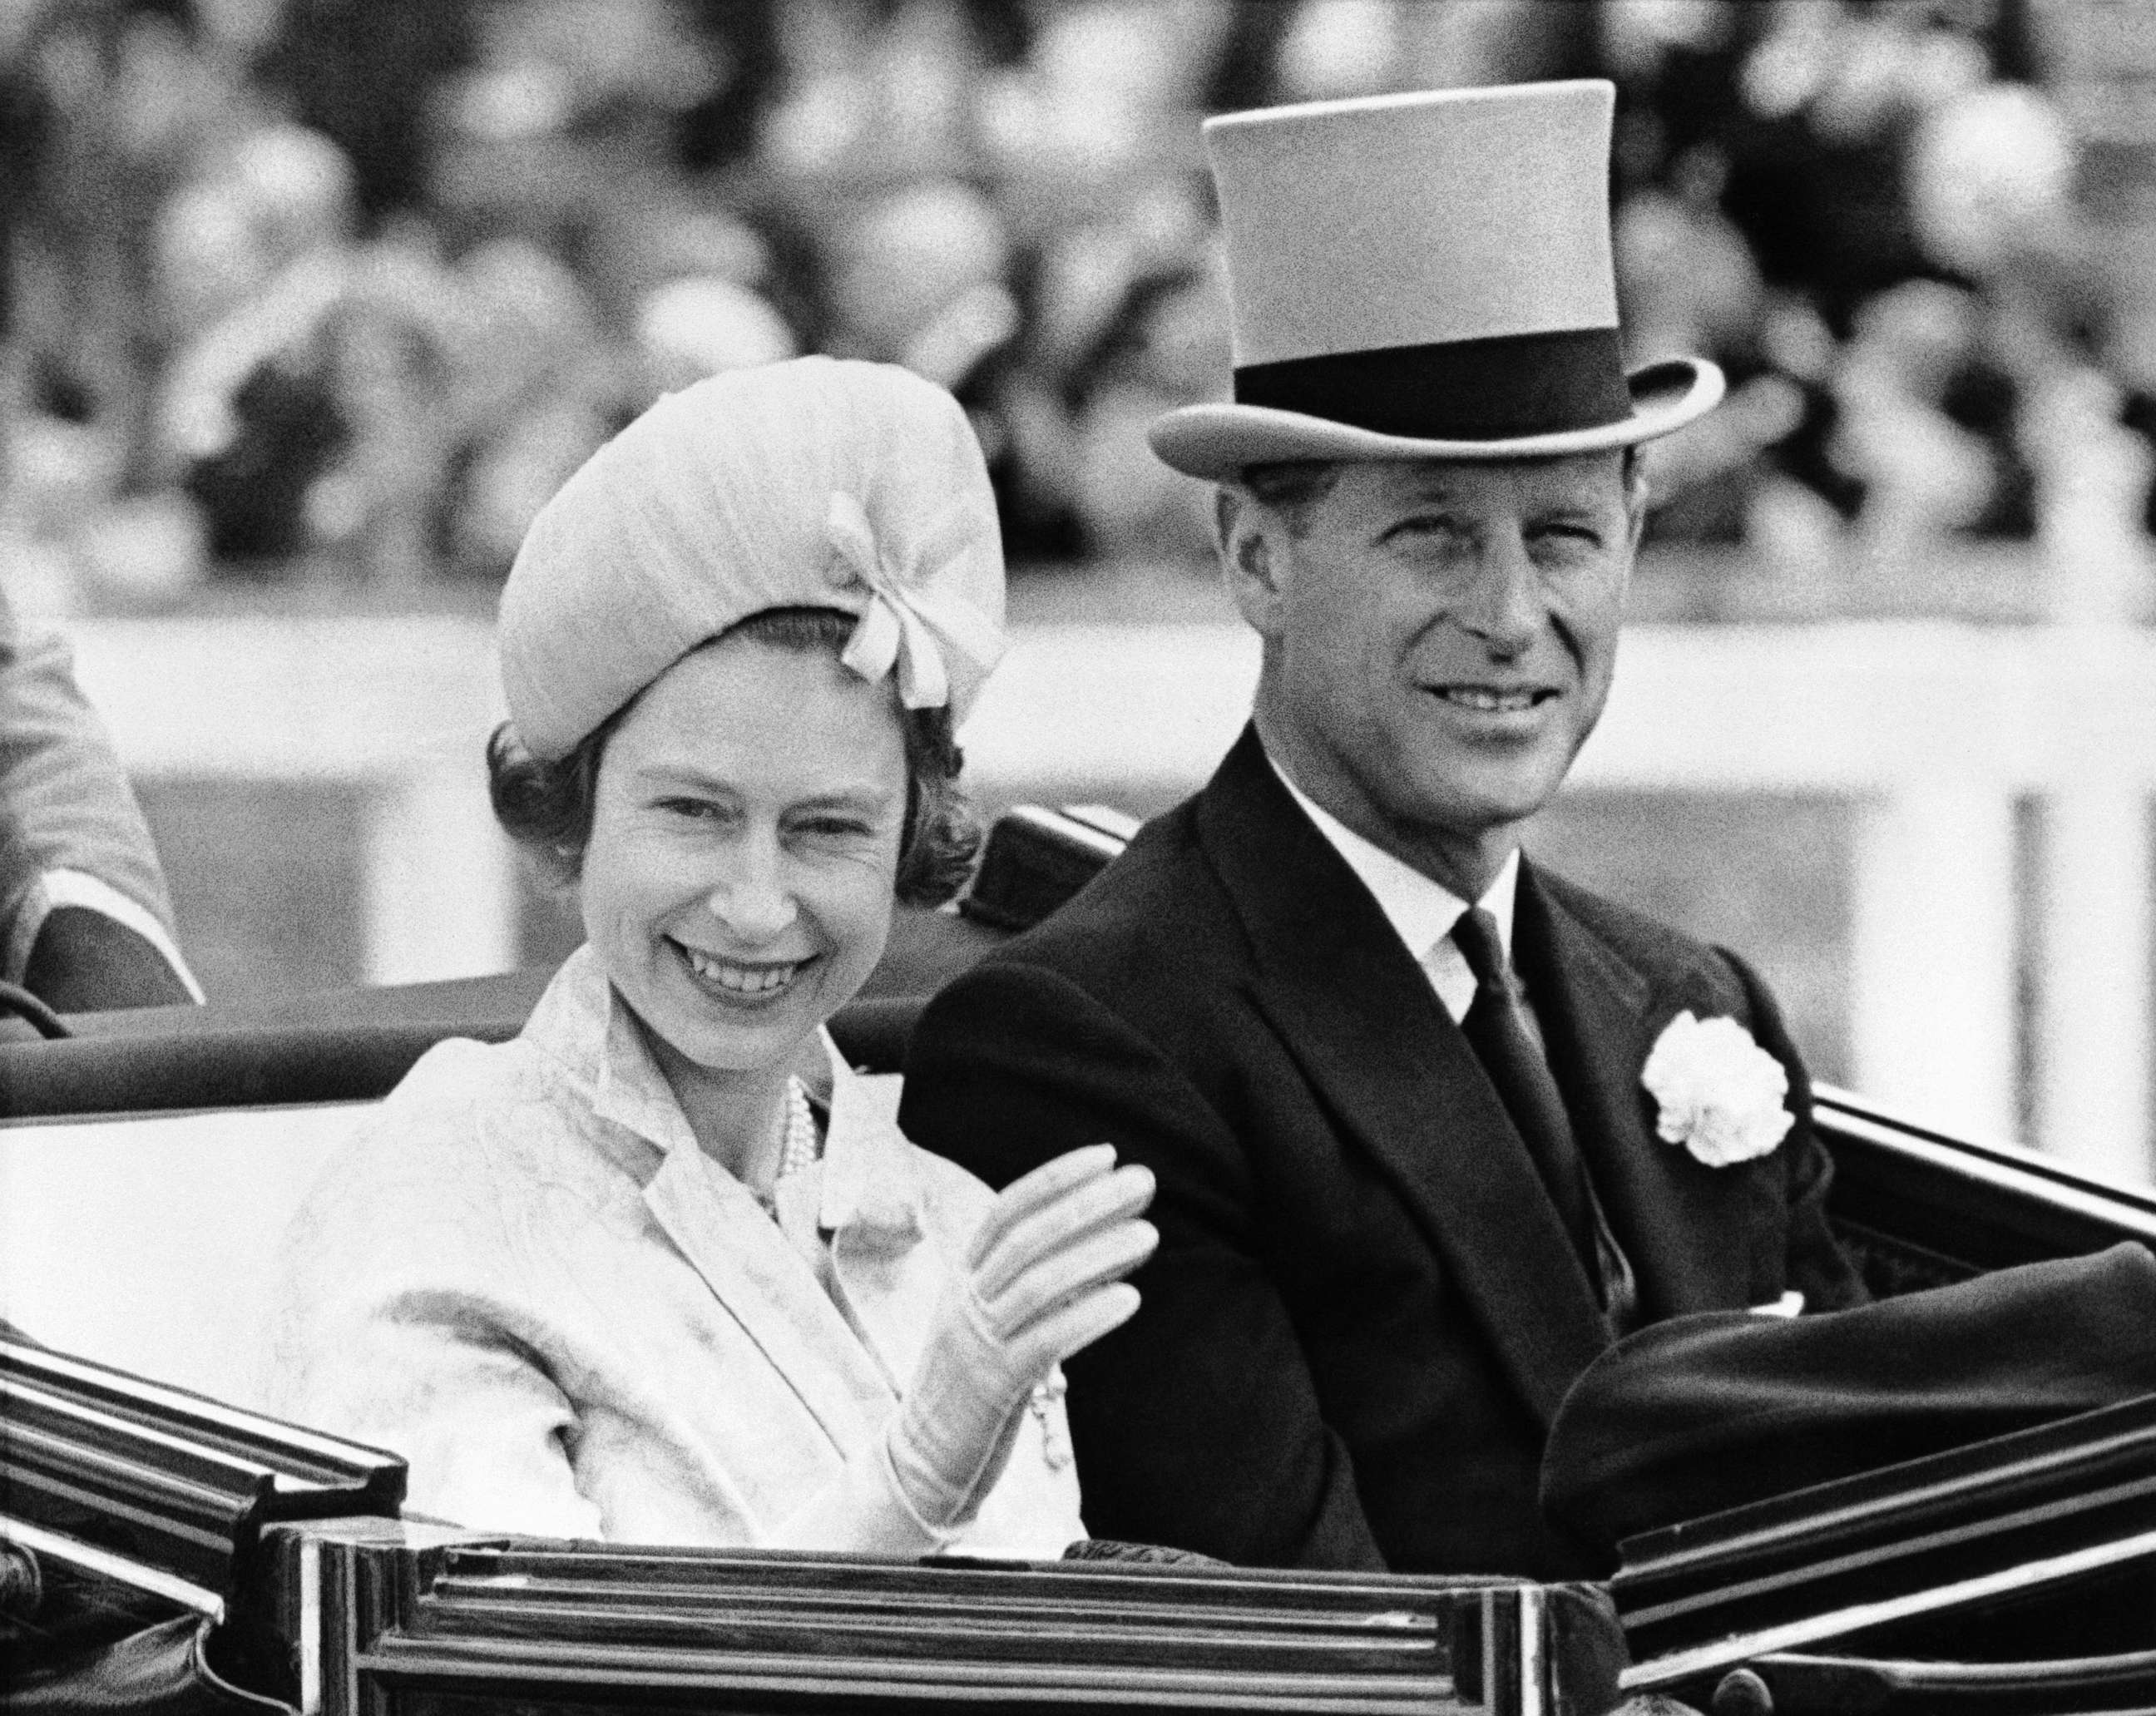 PHOTO: In this June 19, 1962 file photo, Britain's Queen Elizabeth II and Prince Philip travel by open carriage around the track prior to the race program, in Ascot, England.